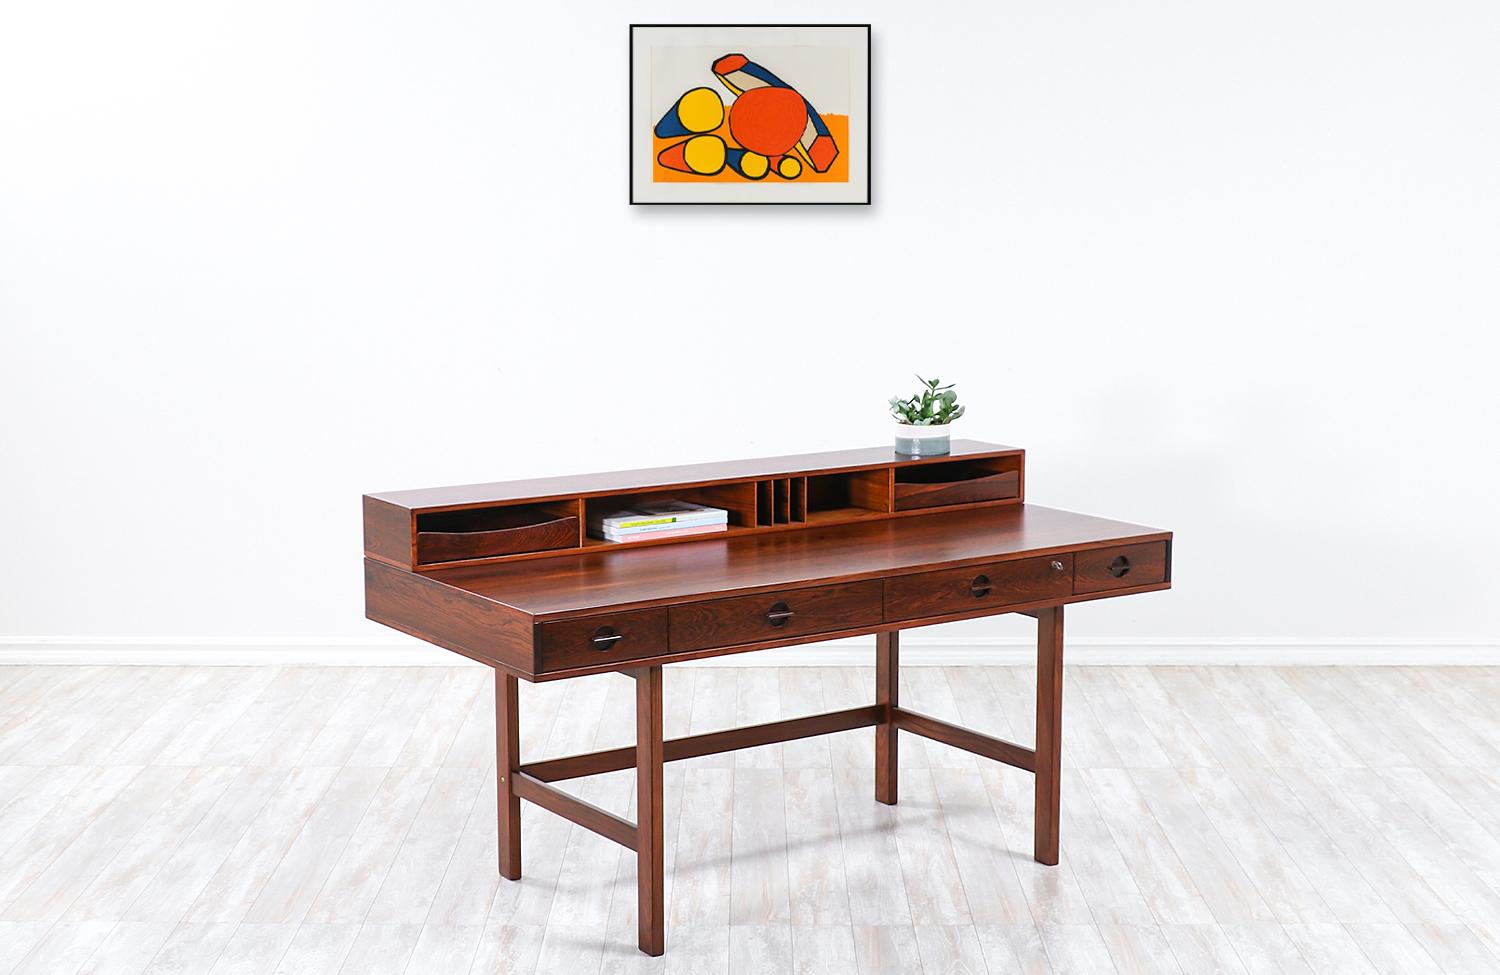 Spectacular rosewood desk designed and crafted by Peter Løvig Nielsen in Denmark, circa 1972. Its ingenious design makes it versatile in accommodating two-persons on each side by simply flipping the top shelf and having the top removable drawers